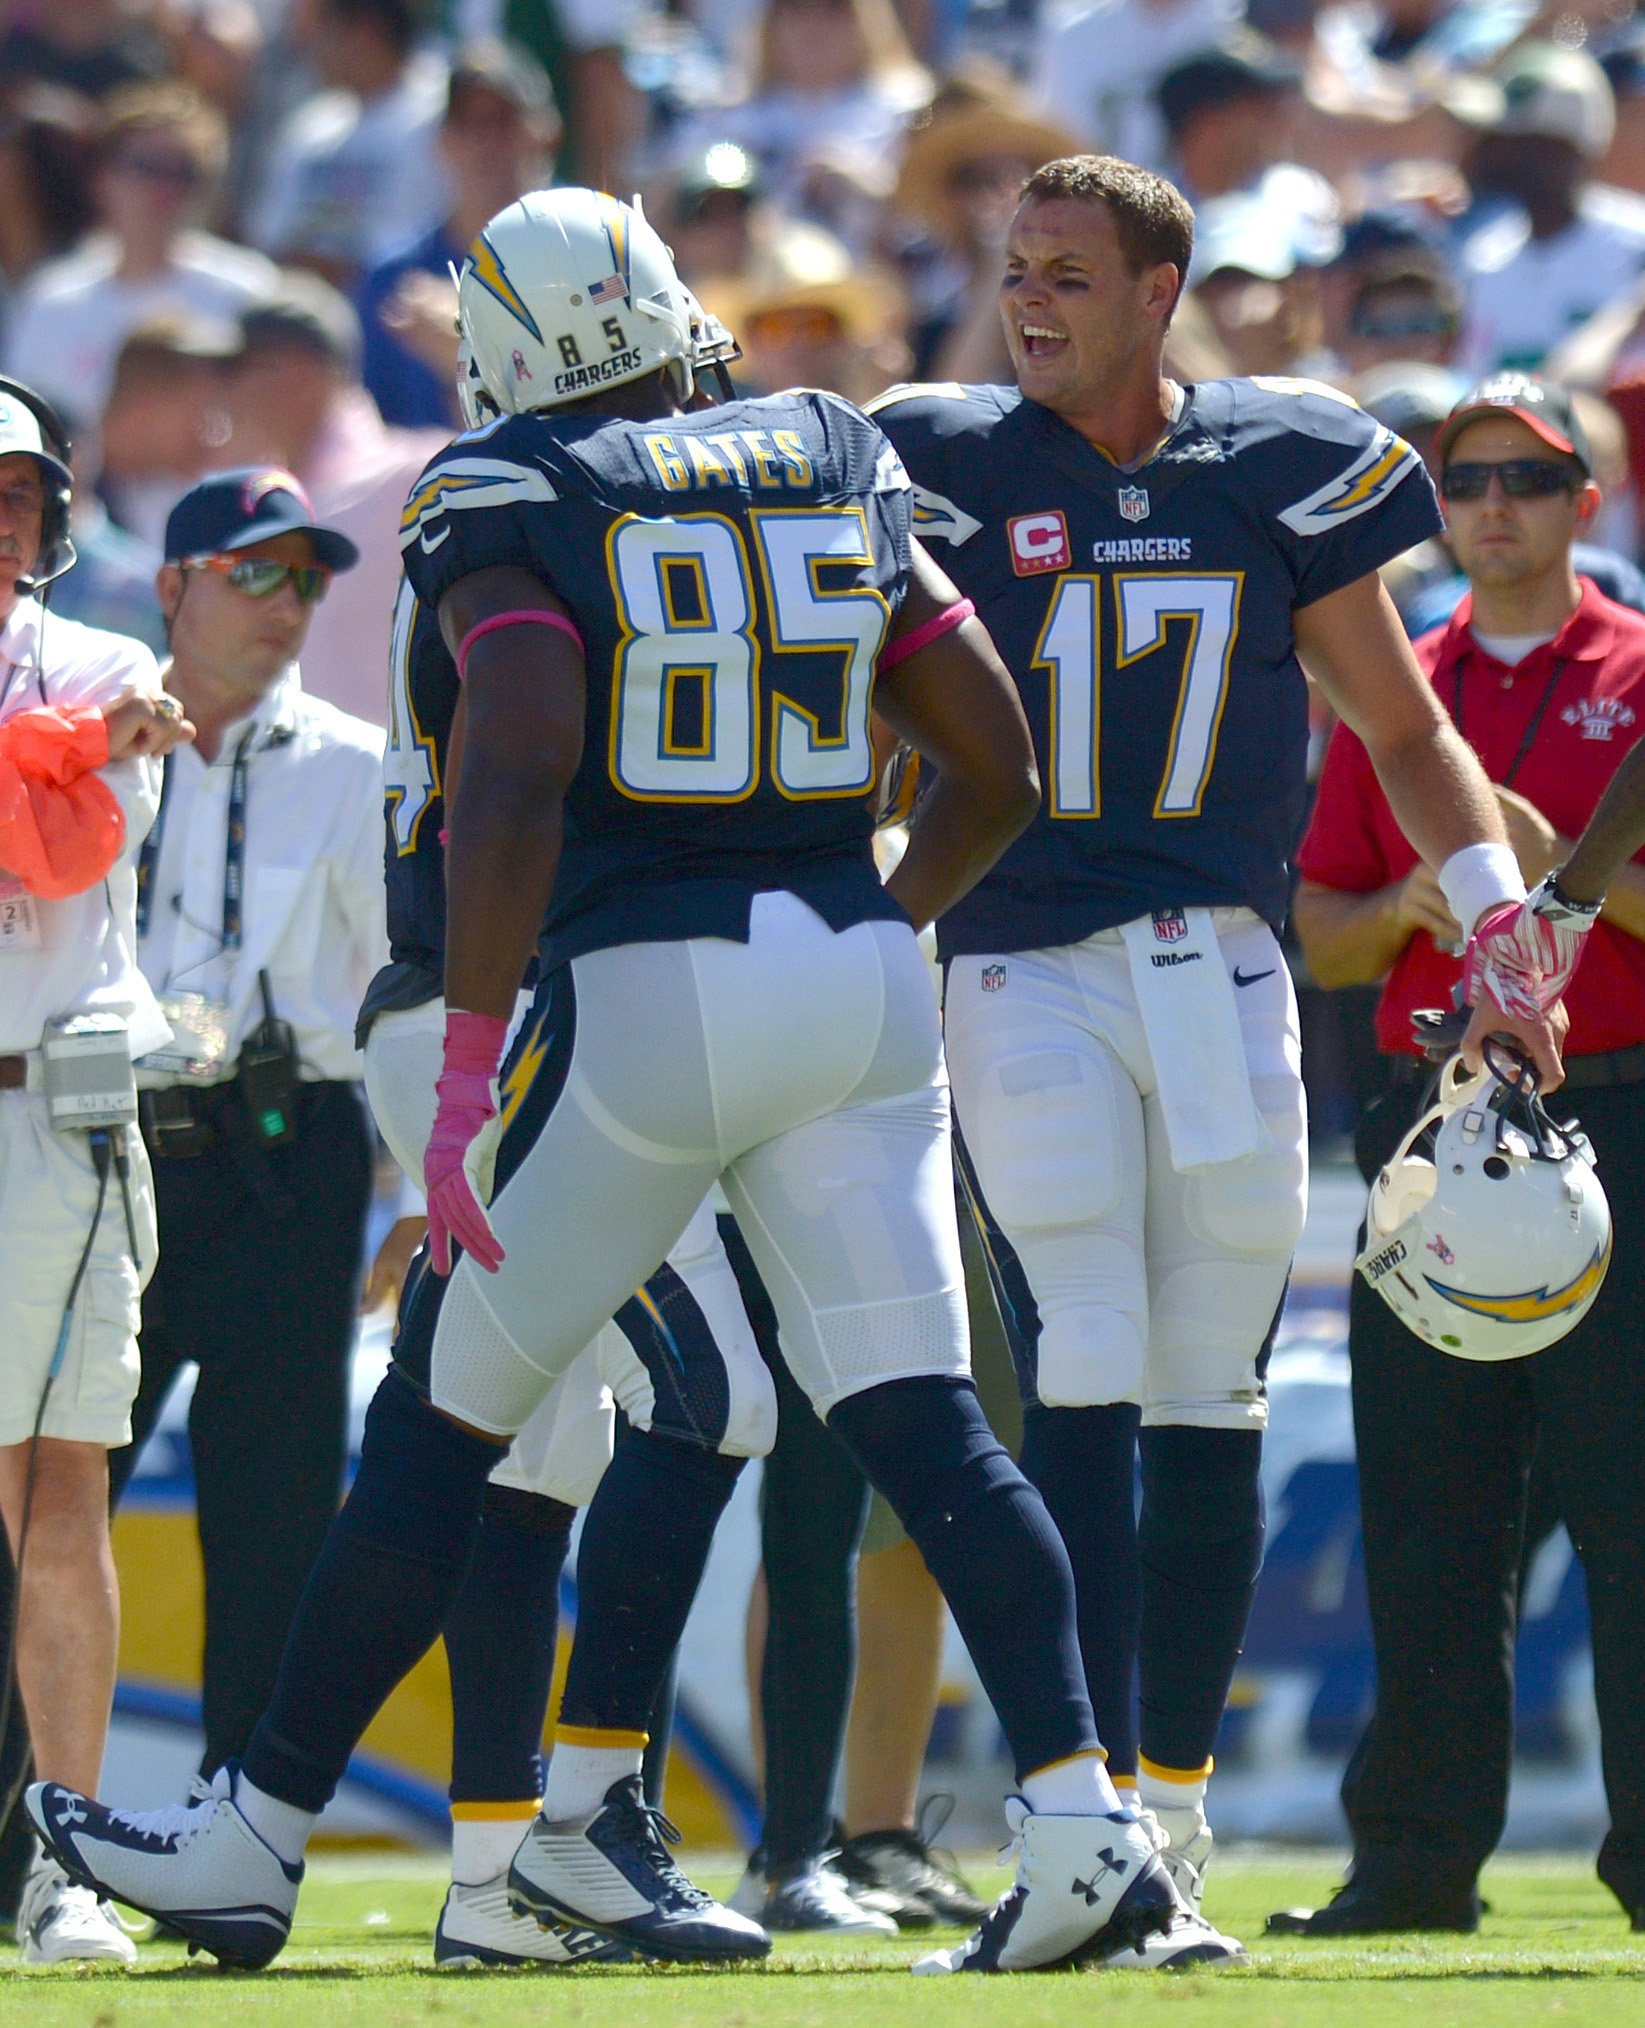 Chargers On Verge Of L.A. Move?